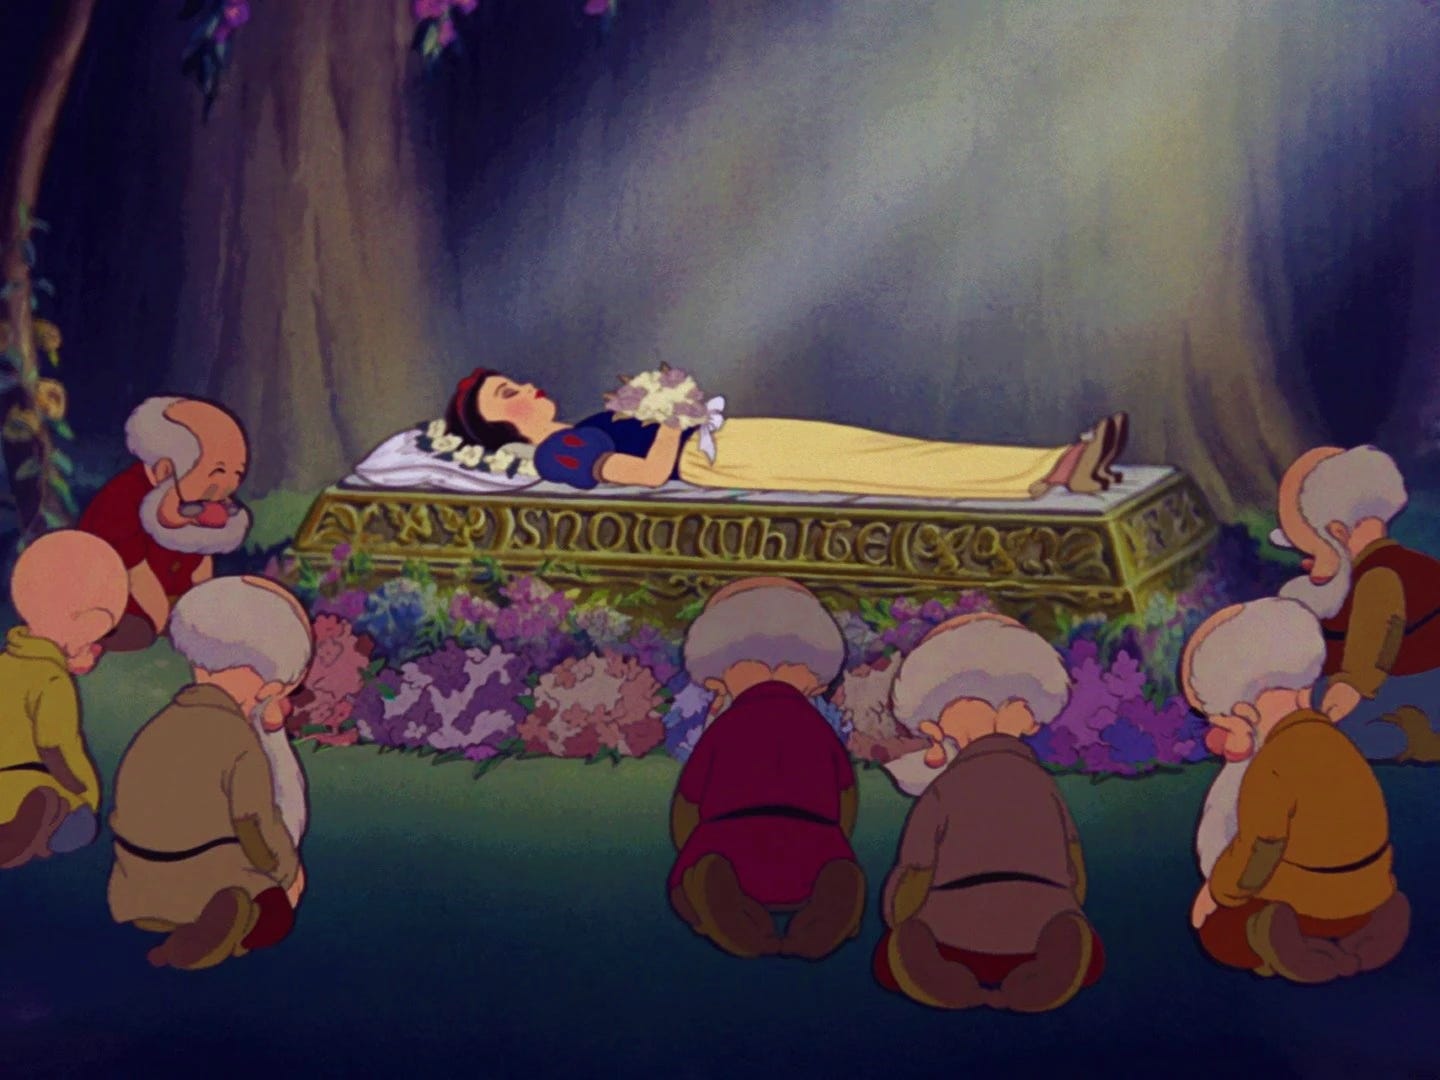 Snow White, sleeping passively, surrounded by worshipful men (...the seven dwarves).